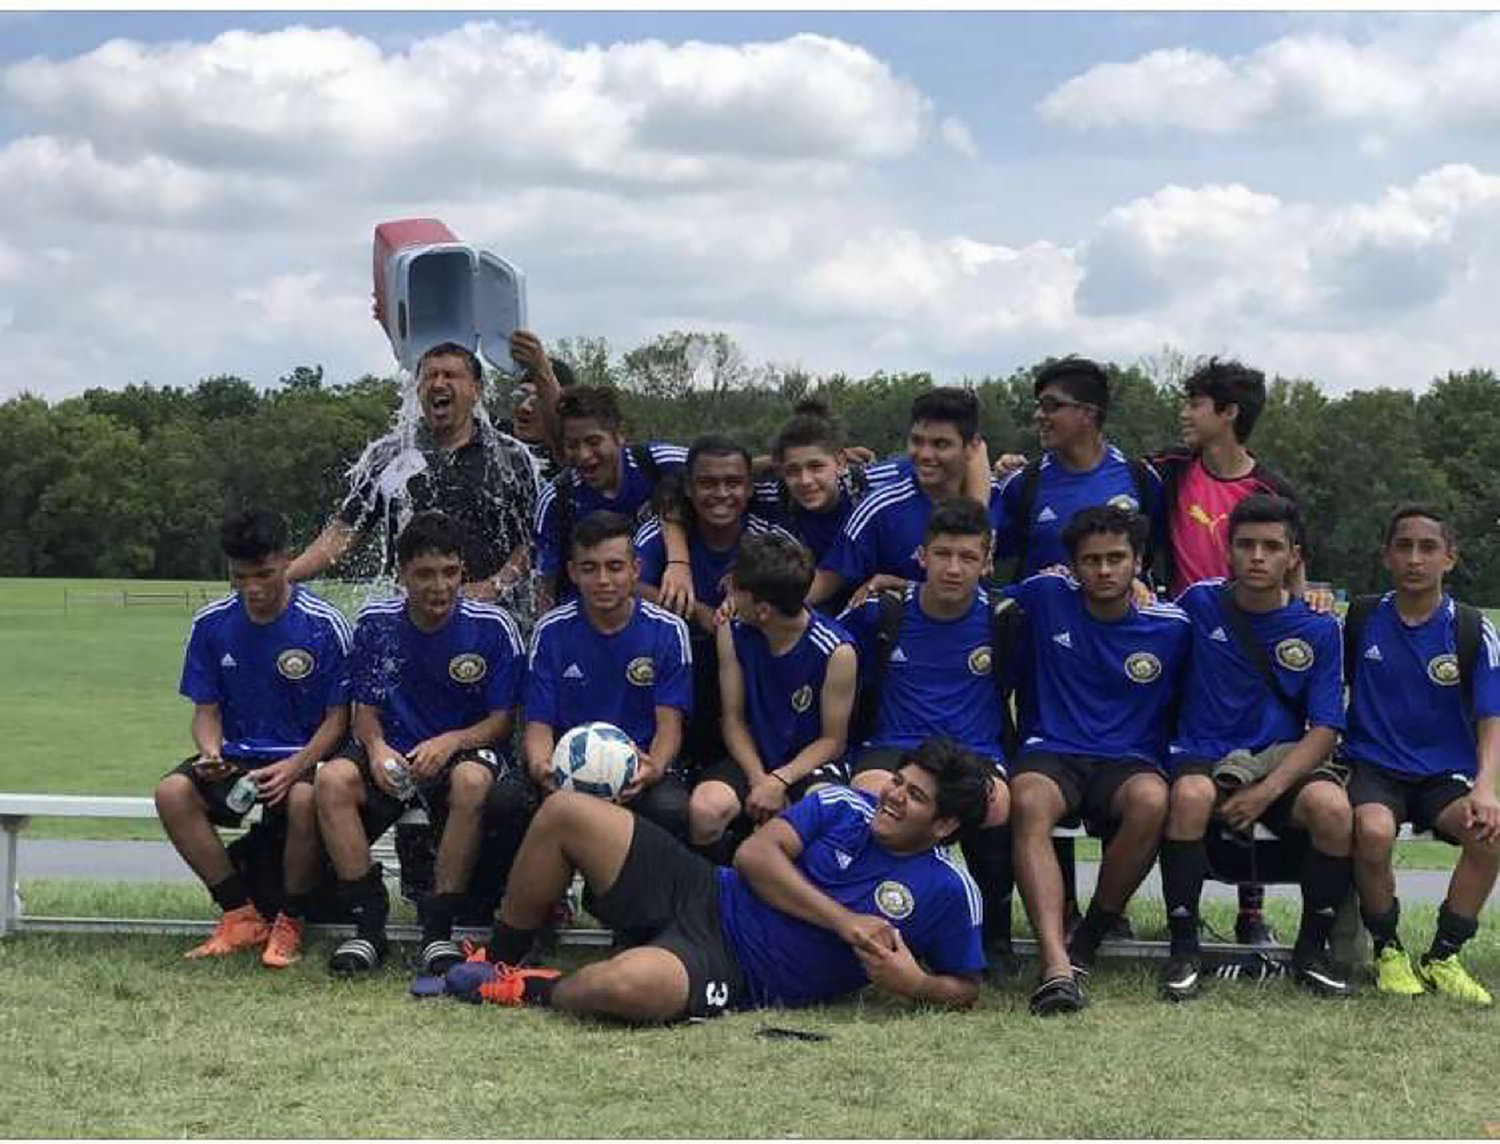 Coach Marlon Navarro had a bucket of water poured on him as a prank during a team photo when Luis Magana was in the club four years ago.